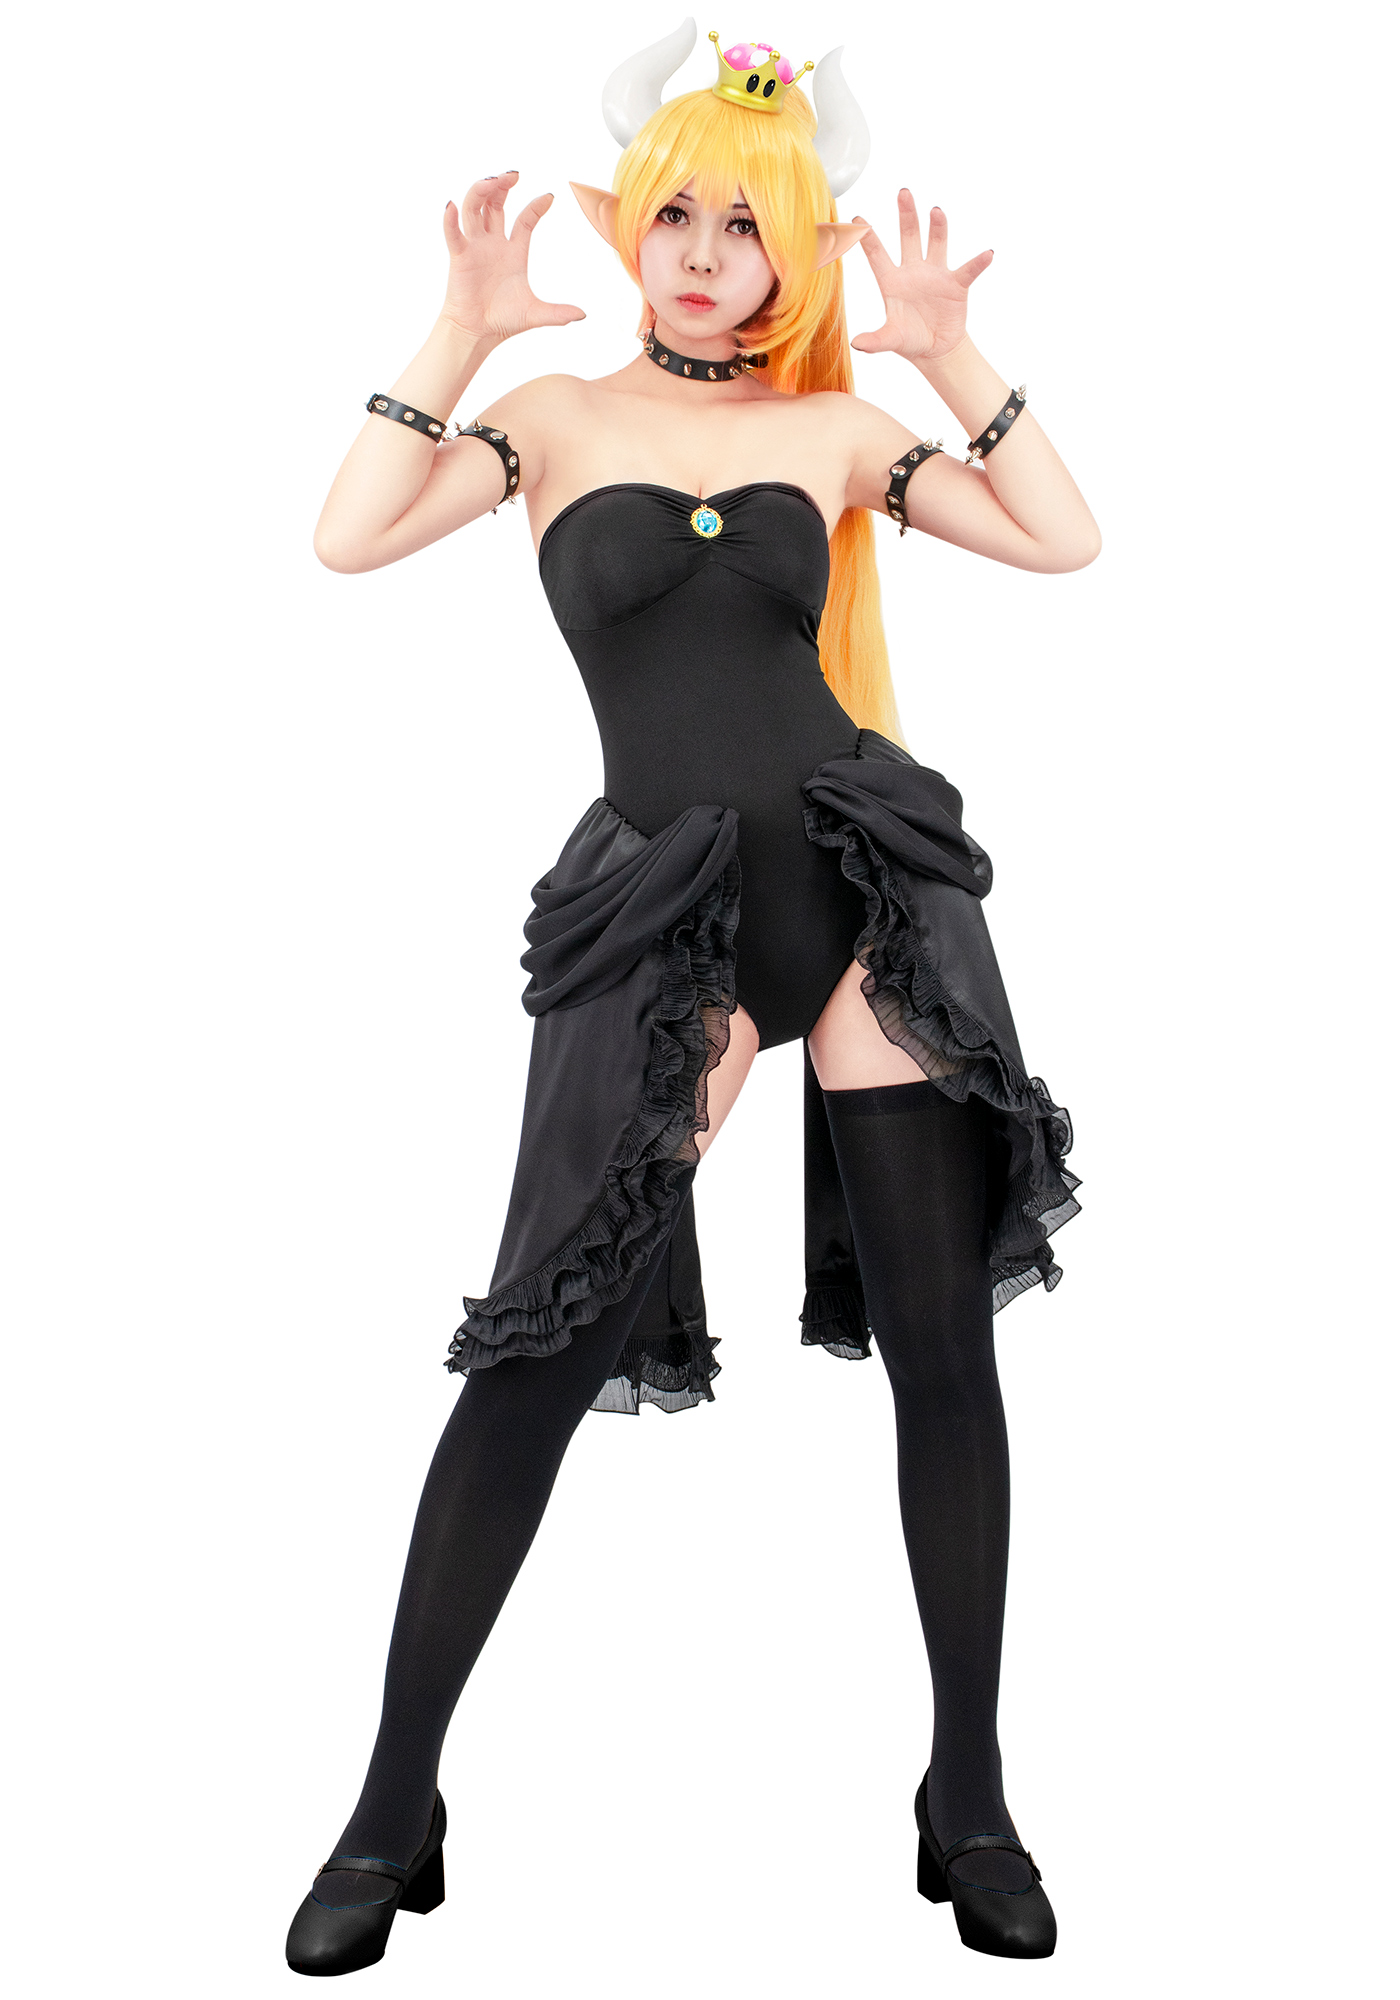 Super Mario Bowsette Cosplay